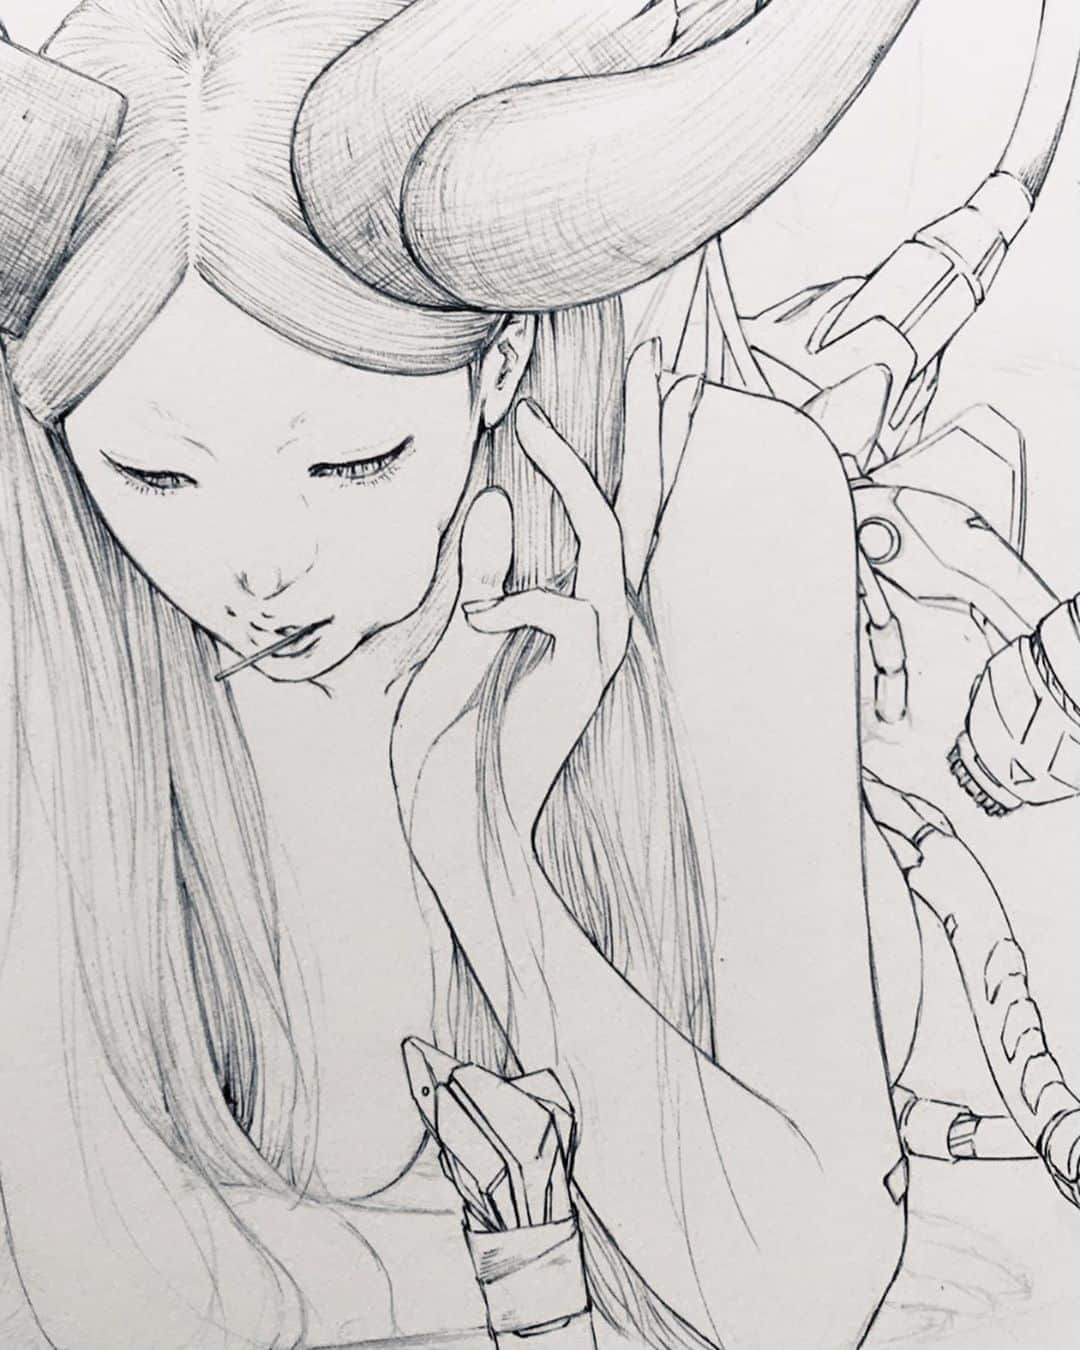 COCOCHOE - Fine Artistのインスタグラム：「About some futuristic fantasy monologues - WIP (2020) by COCOCHOE   Pencil n Pen on A3 Paper   #artstagram #creator #drow #sketches #instaart #instaartist #beautiful #minimalism #mode #moda #mood #dibujar #diseño  #figurative #figuredrawing #sketchbook #coverart #conceptdesign #peinture #dessin #conceptartist #abstractexpressionism #artdaily #artcollective #artgram #newyorker #londoner #parisian #impressionism #abstractexpressionism」